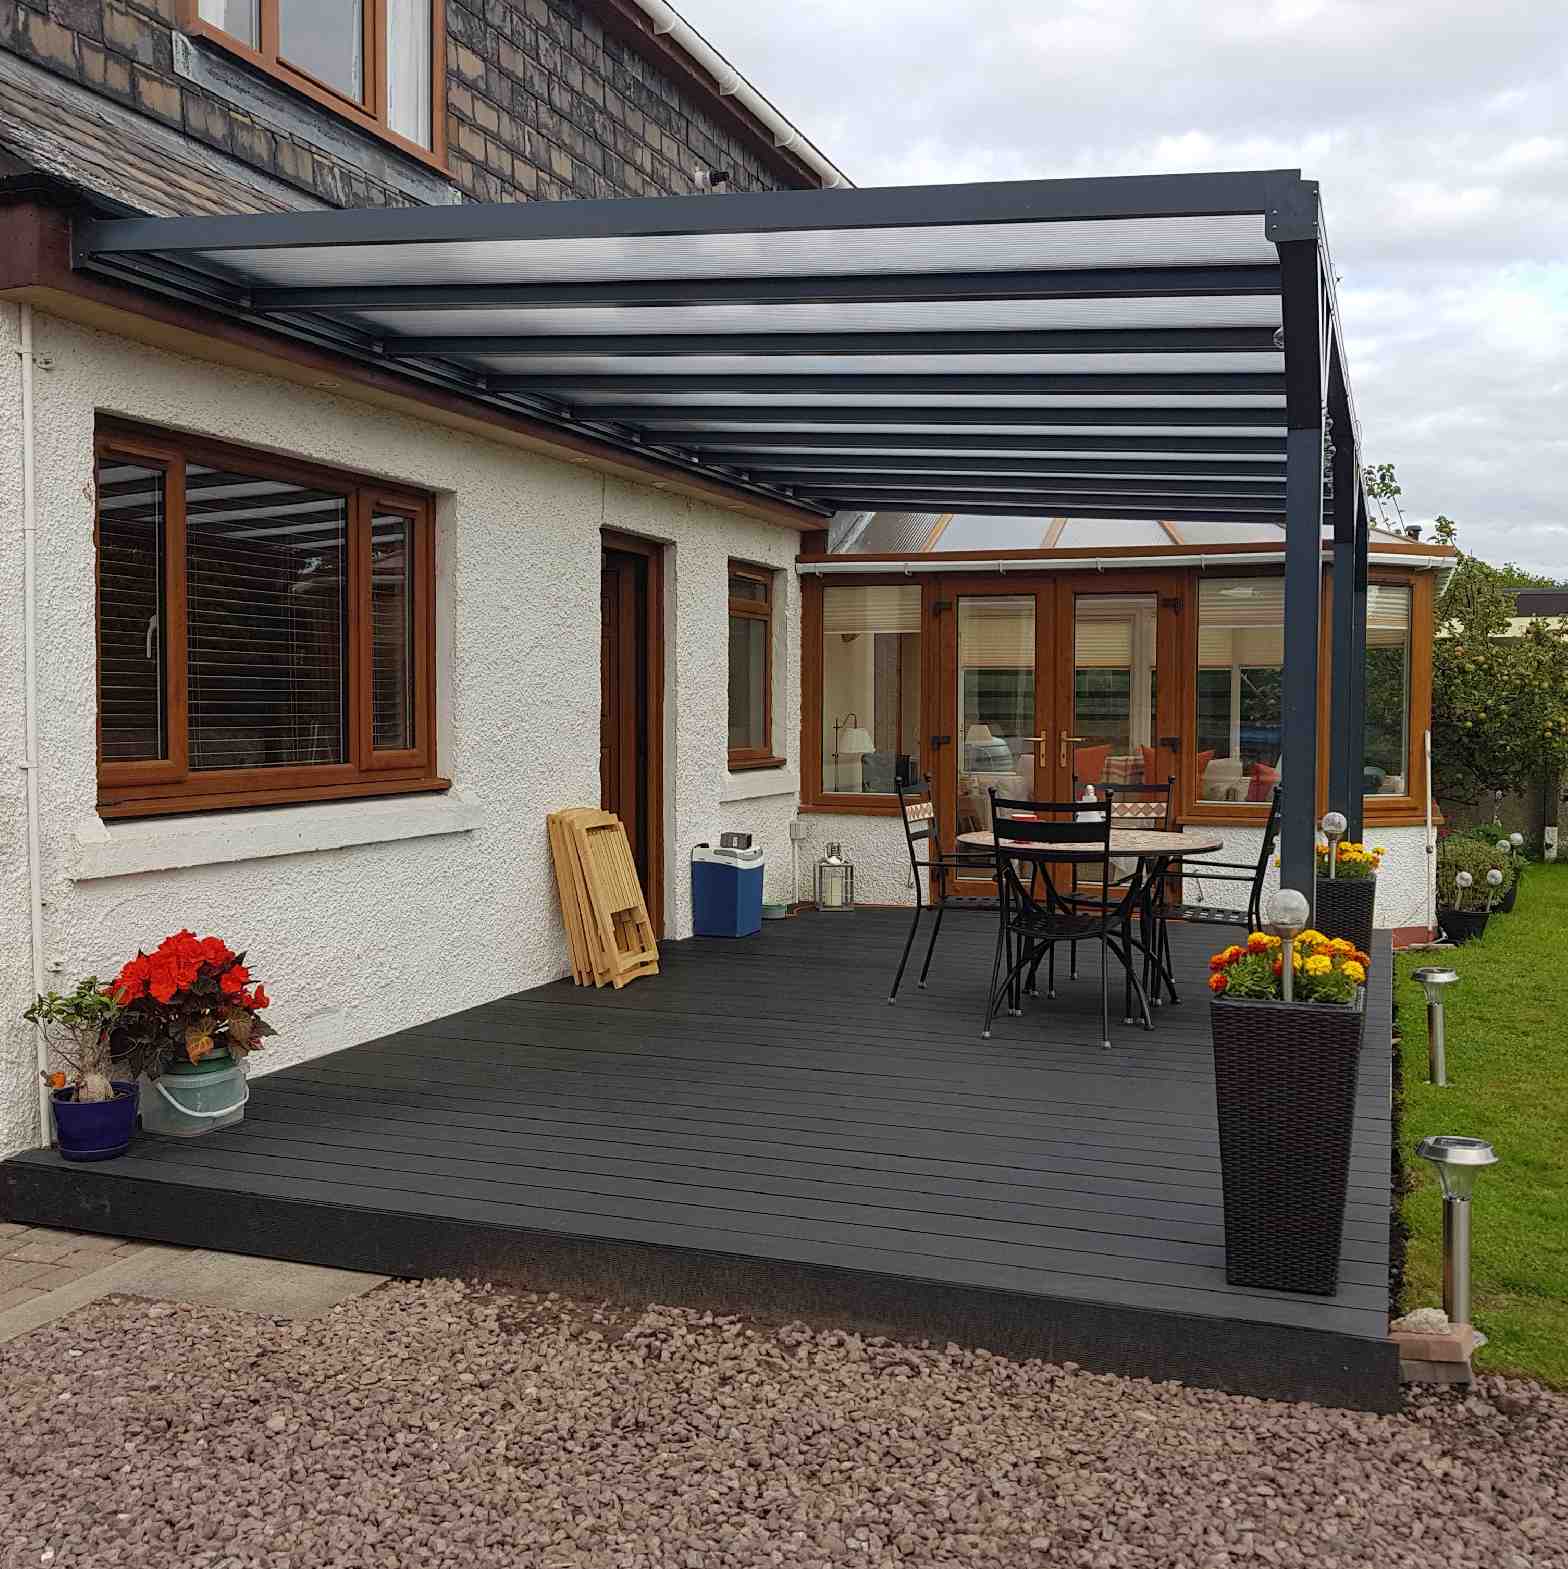 Buy Omega Verandah, Anthracite Grey, 16mm Polycarbonate Glazing - 10.6m (W) x 2.5m (P), (5) Supporting Posts online today